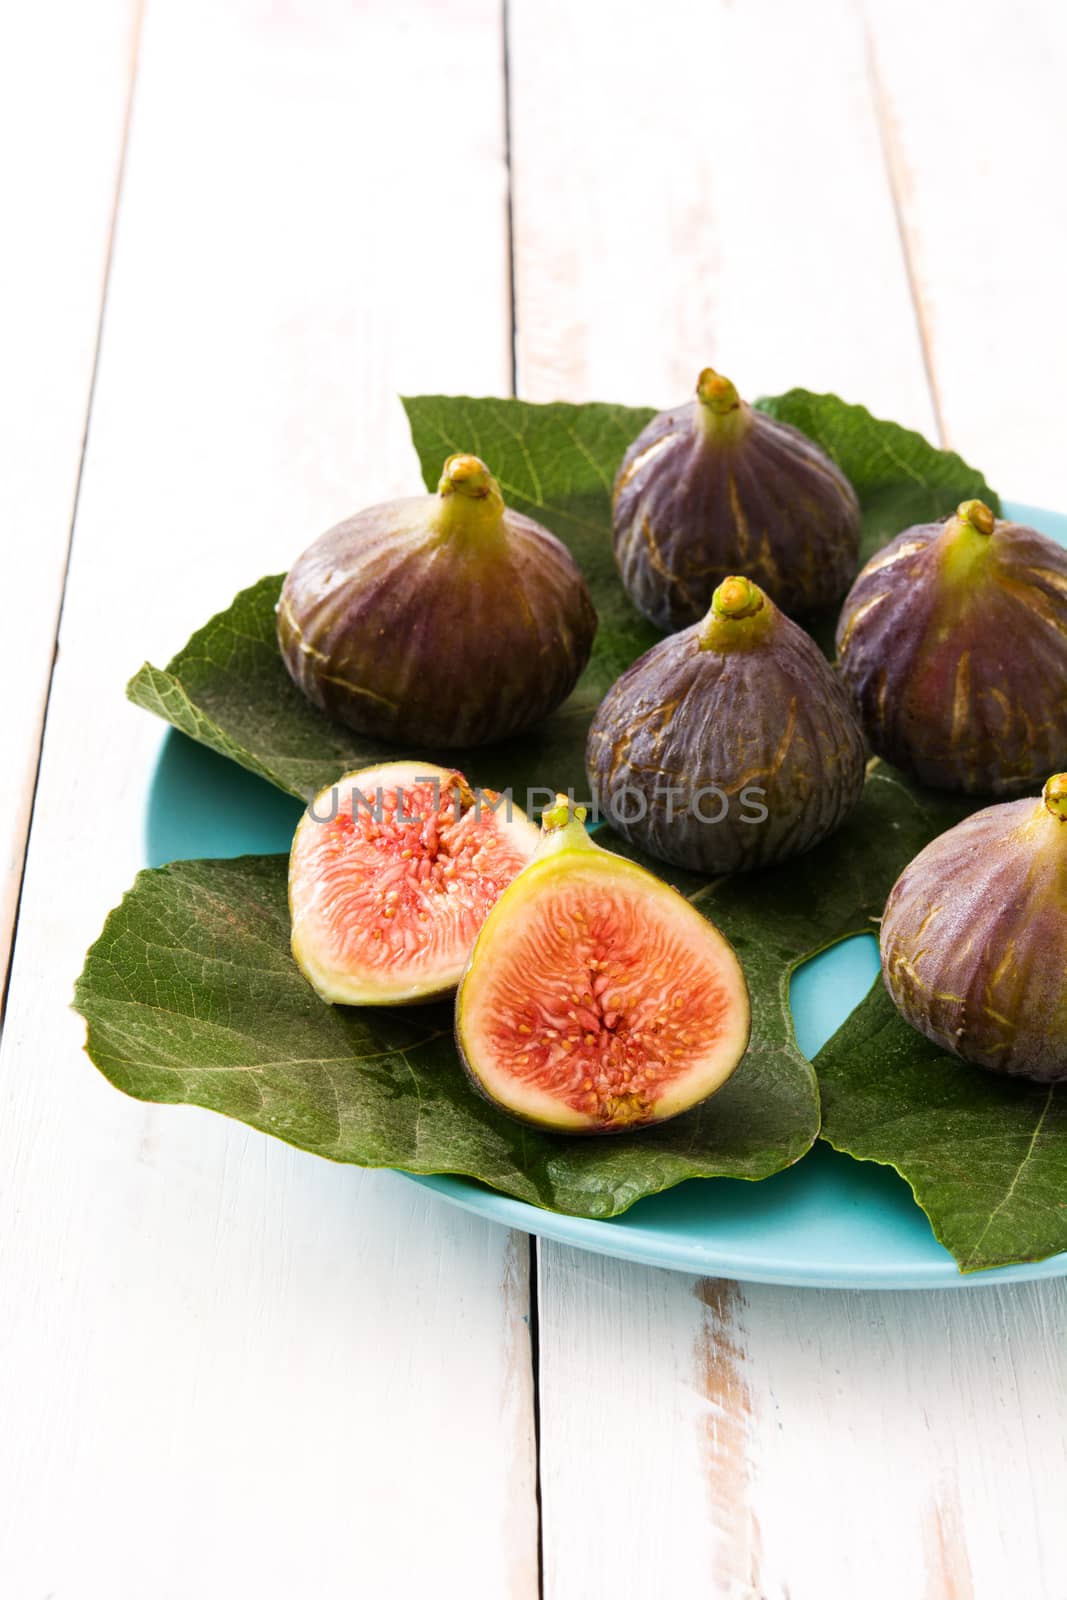 Fresh figs on white wooden background by chandlervid85